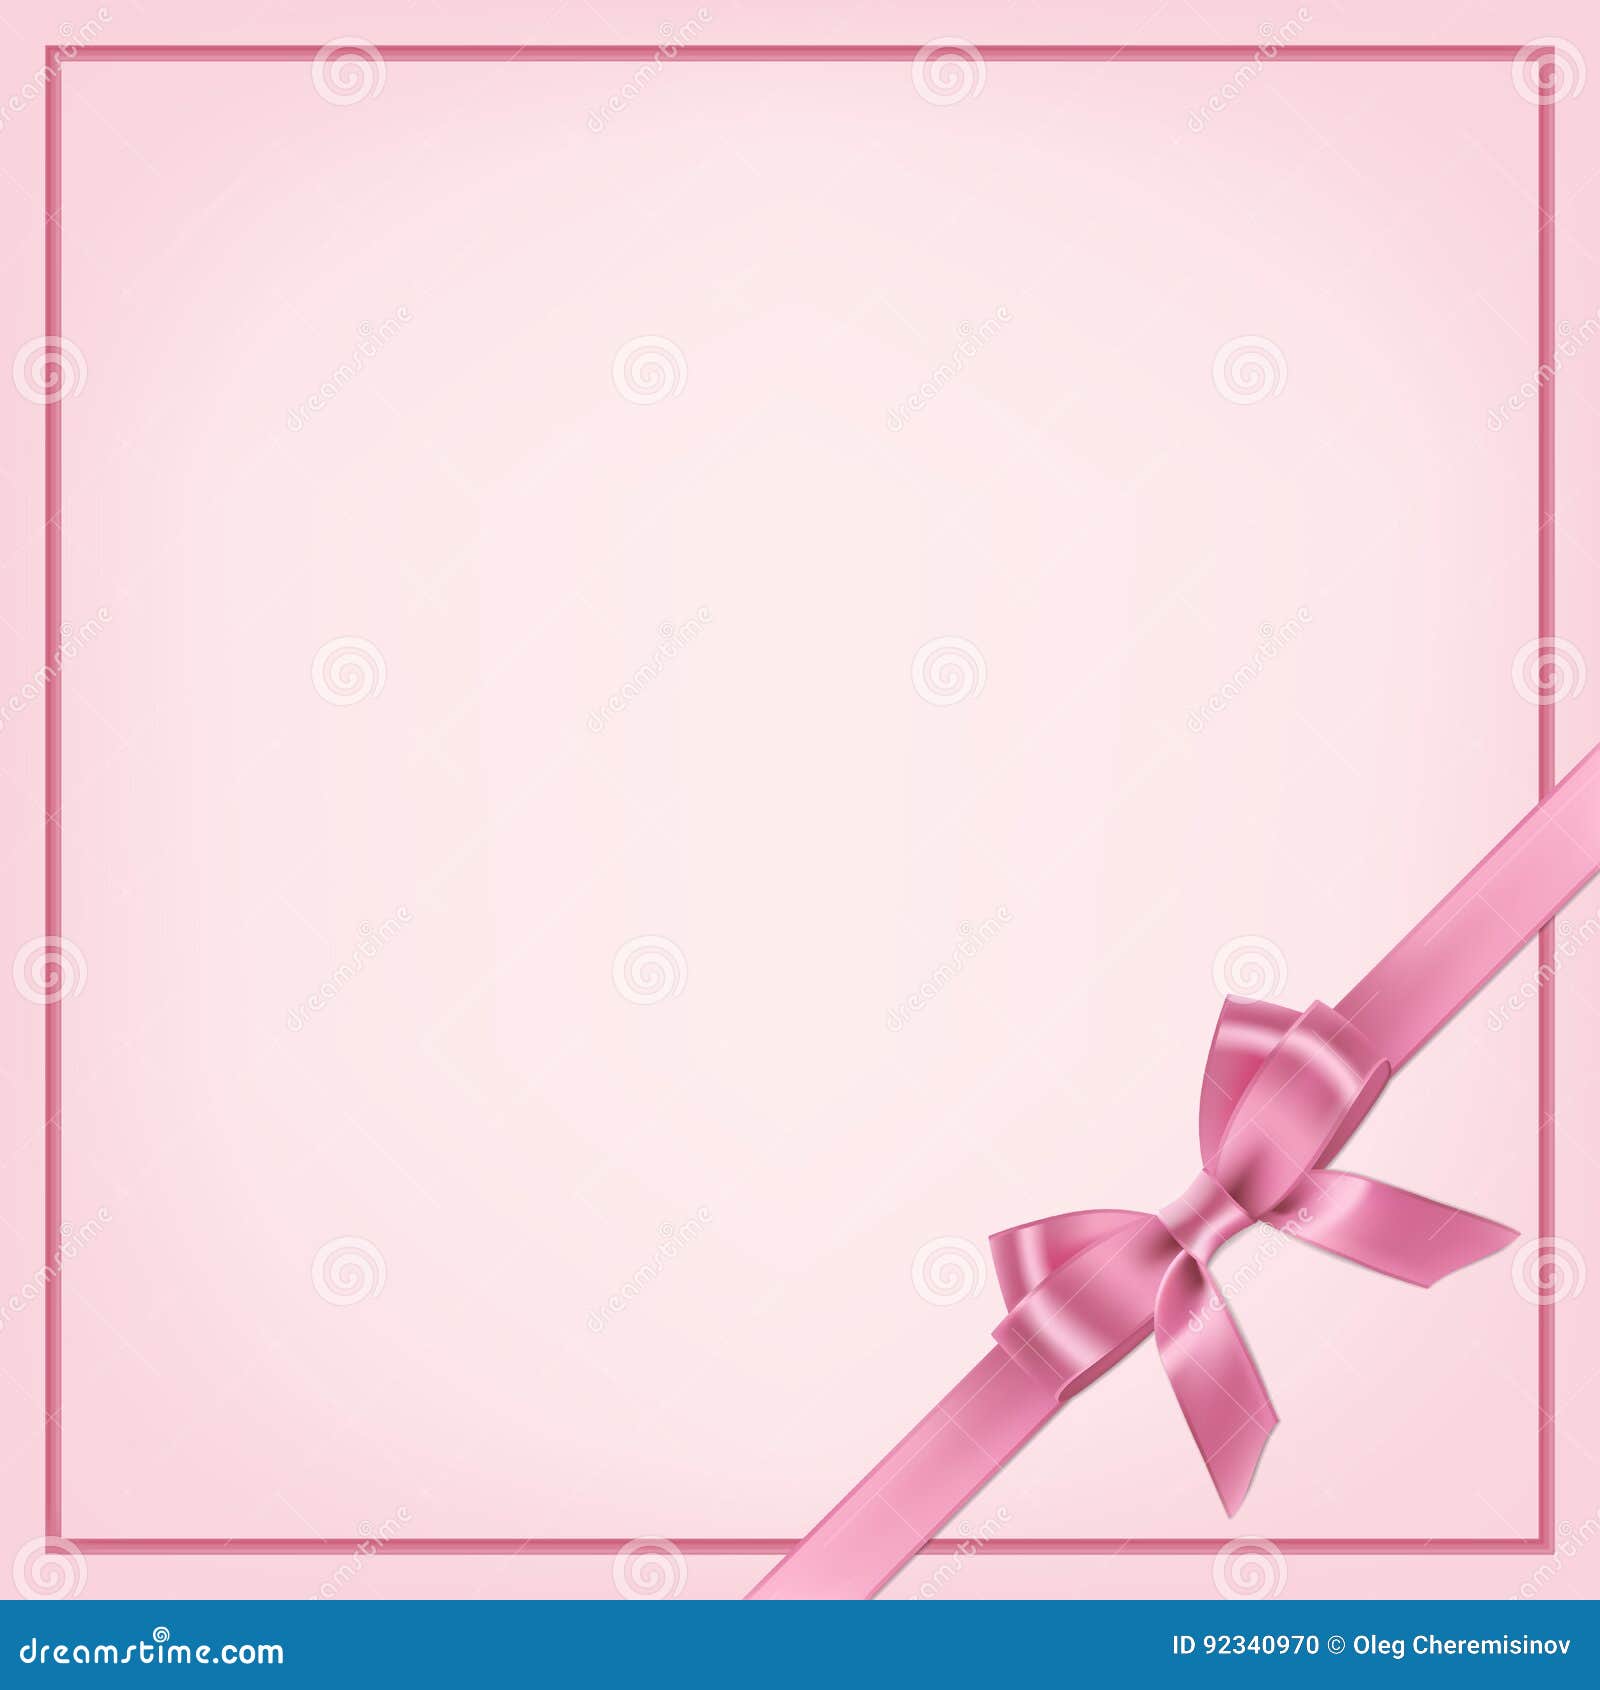 Pink Postcard Template with Ribbon and Bow. Vector Realistic ...